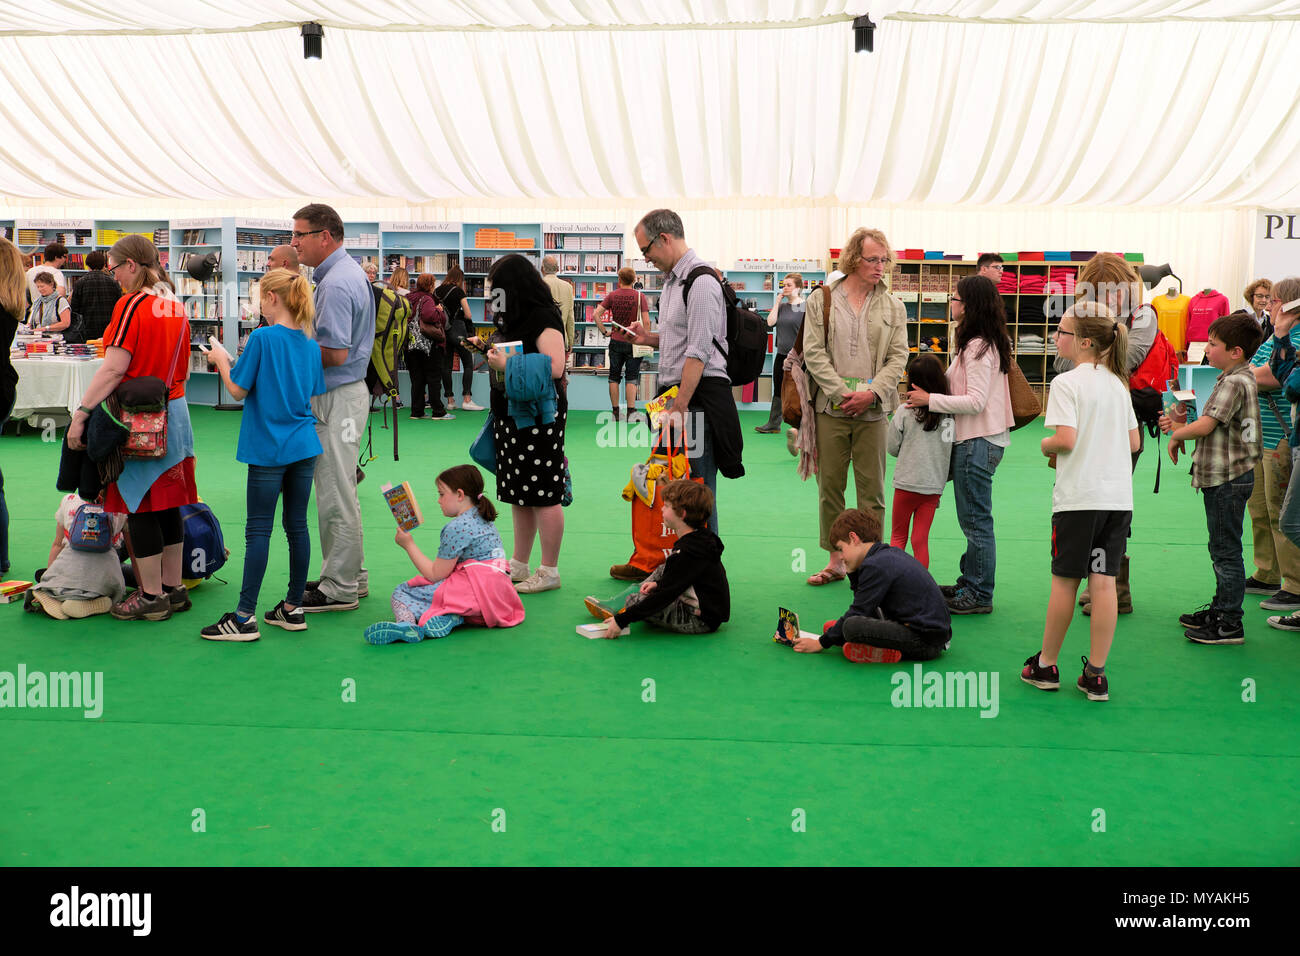 Families and children queue in the Hay Festival bookstore for childrens' author Andy Stanton to sign his book Natboff!  Hay-on-Wye  UK  KATHY DEWITT Stock Photo